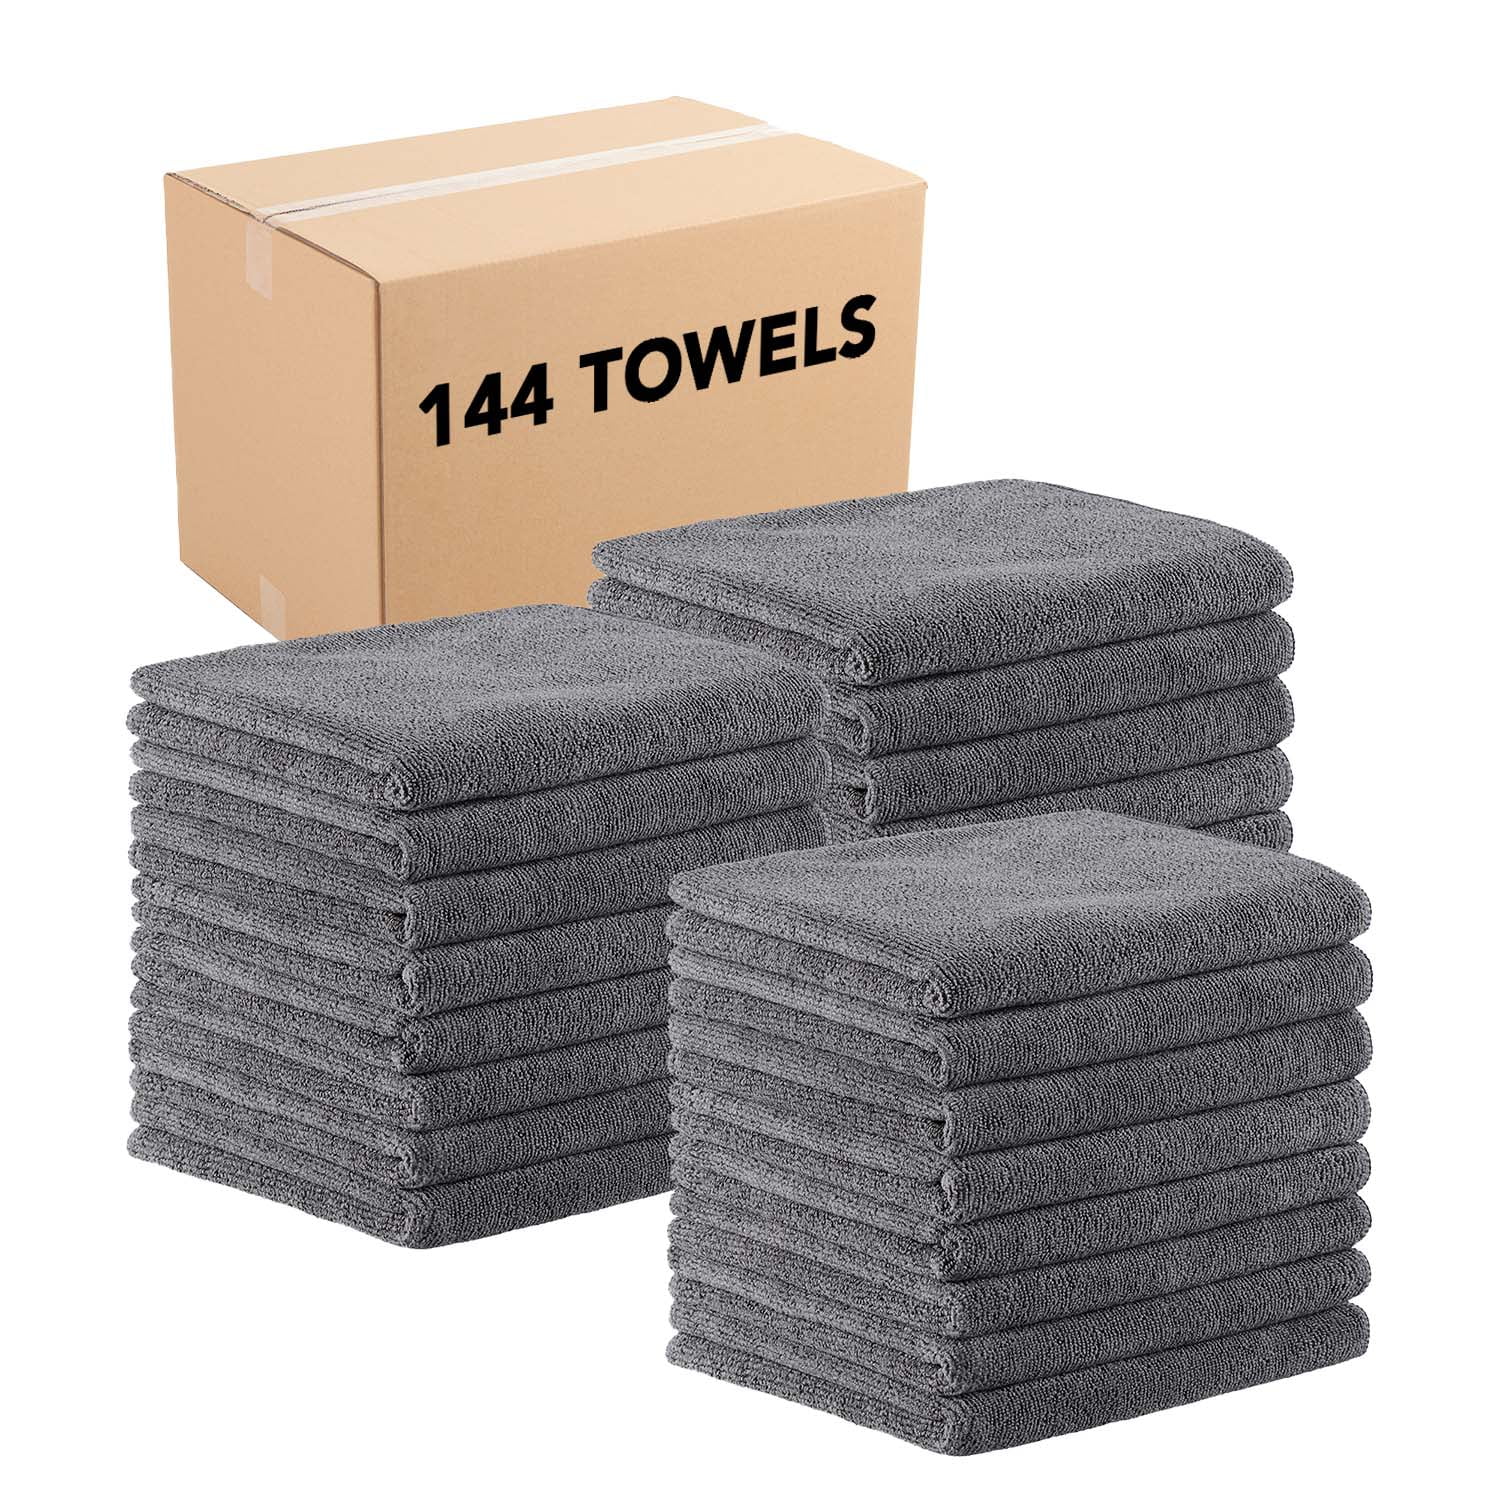 Arkwright Microfiber Bleach-Safe Salon Towels - Soft Coral Fleece - 16 x 27 in - (Pack of 10) Brown, Adult Unisex